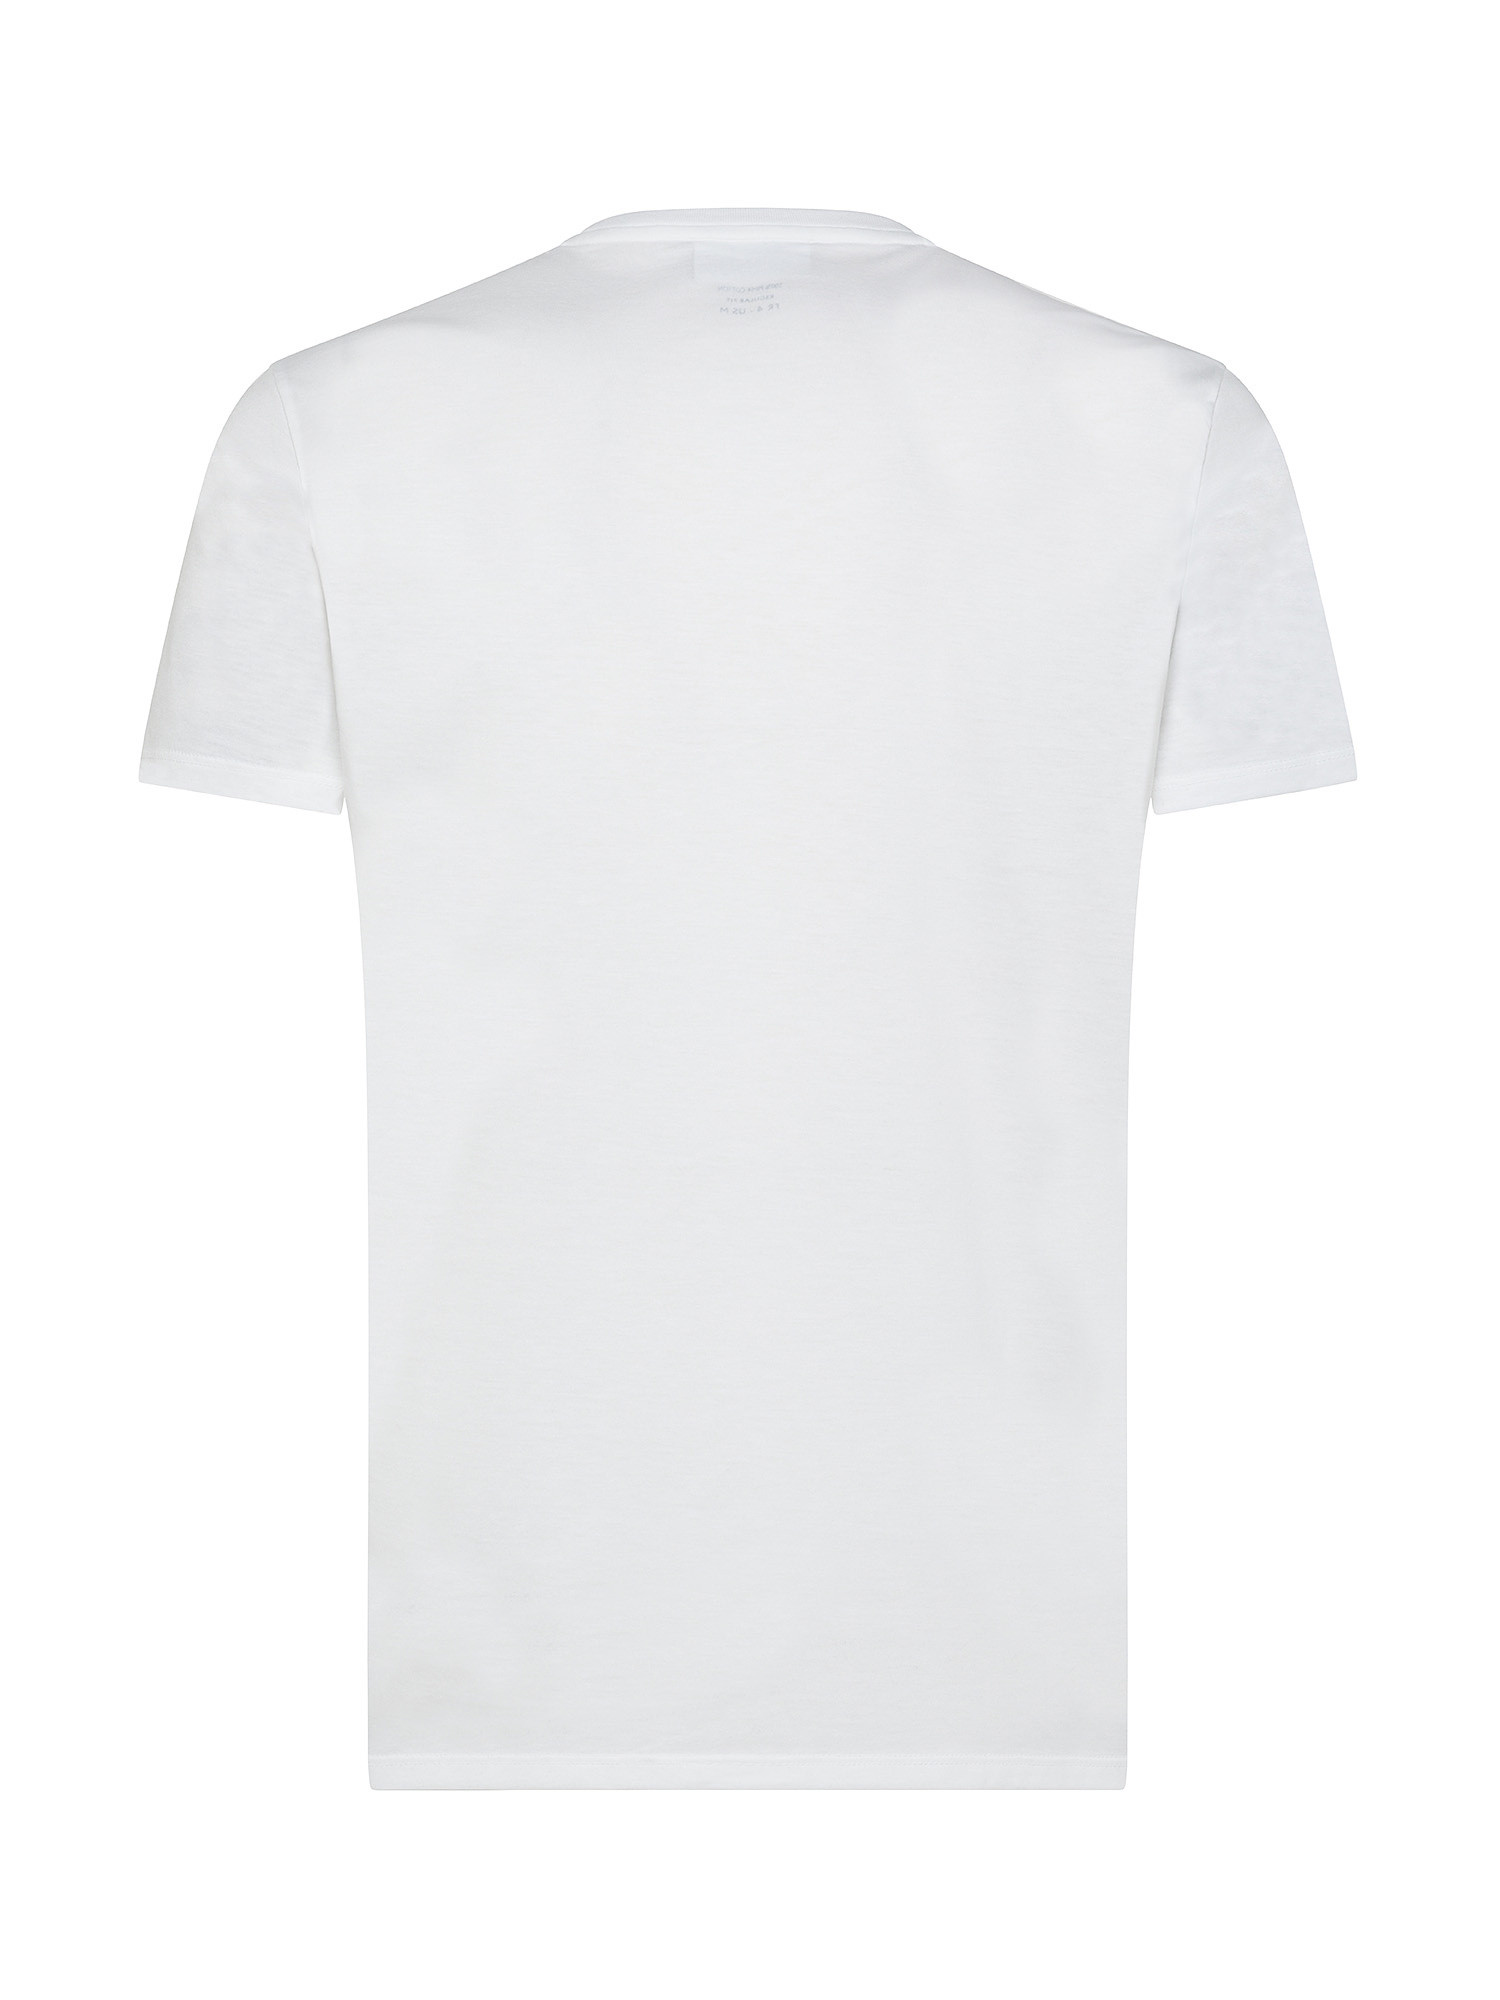 Lacoste - T-shirt girocollo in jersey di cotone Pima, Bianco, large image number 1